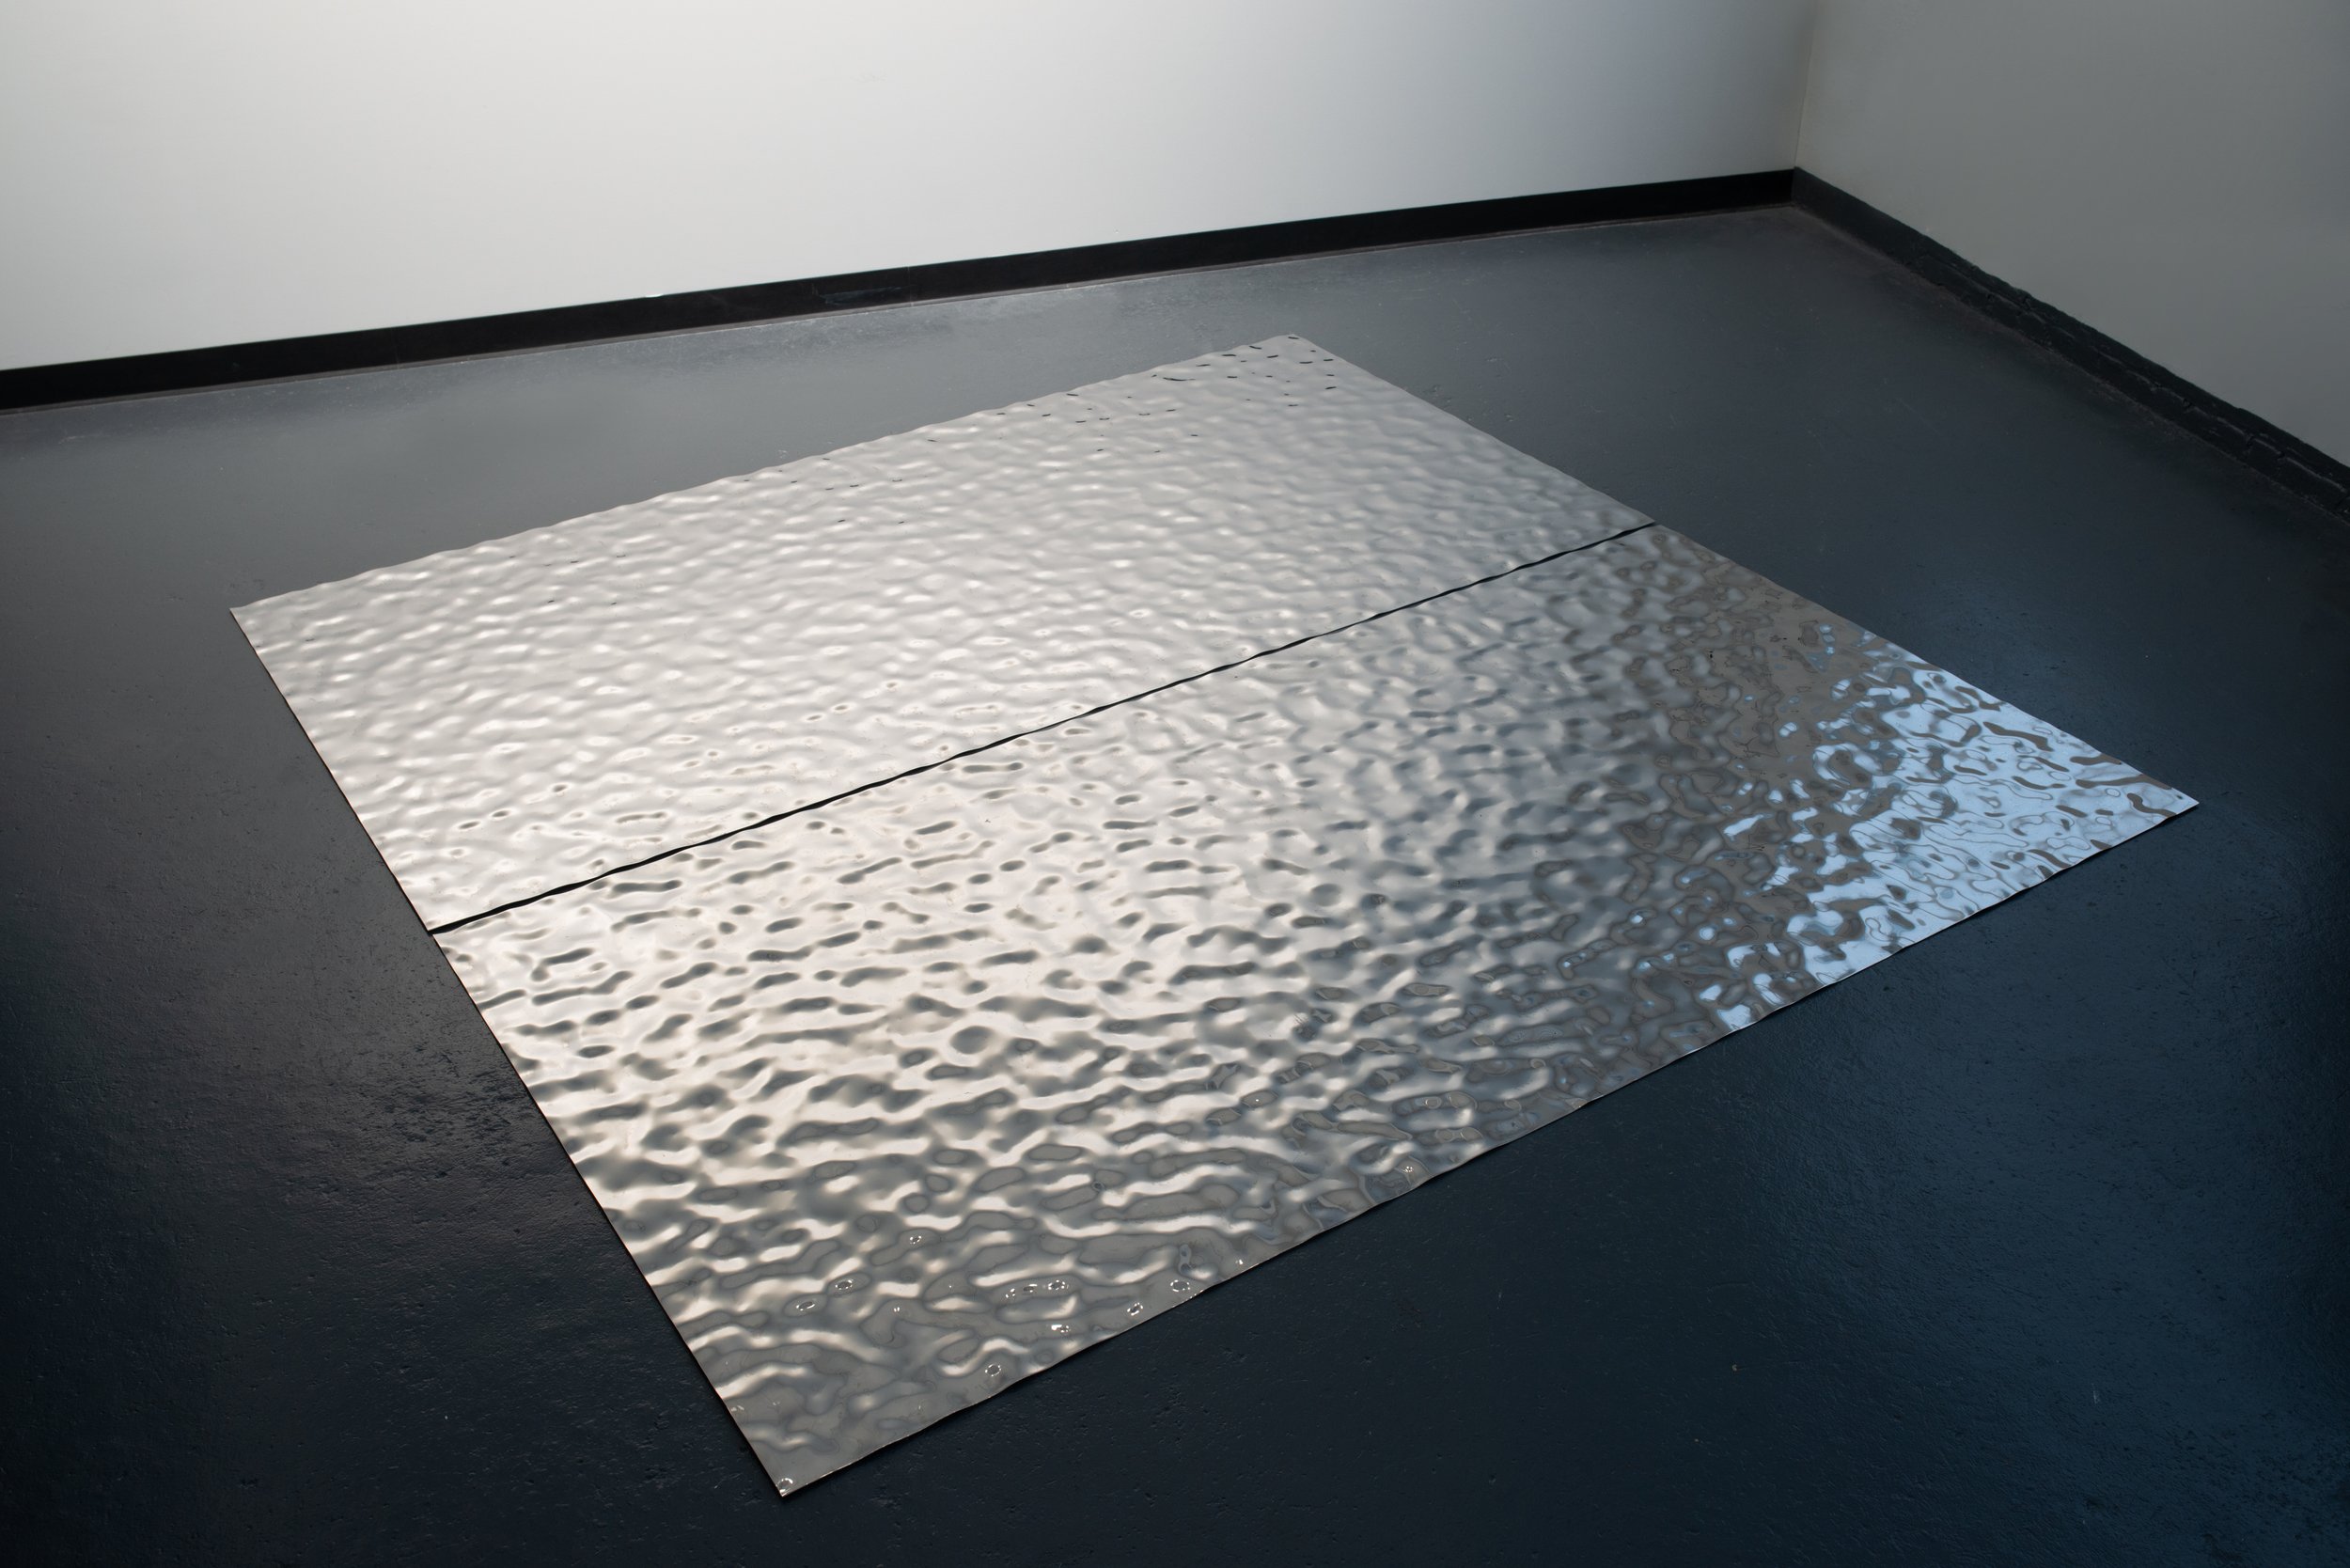 Mizukagami_(The_shadow_of_the_moon_reflected_in_water)_0.25x95.875x95.875in_Stainless_Steel_Miya_Ando_2019_15.jpg